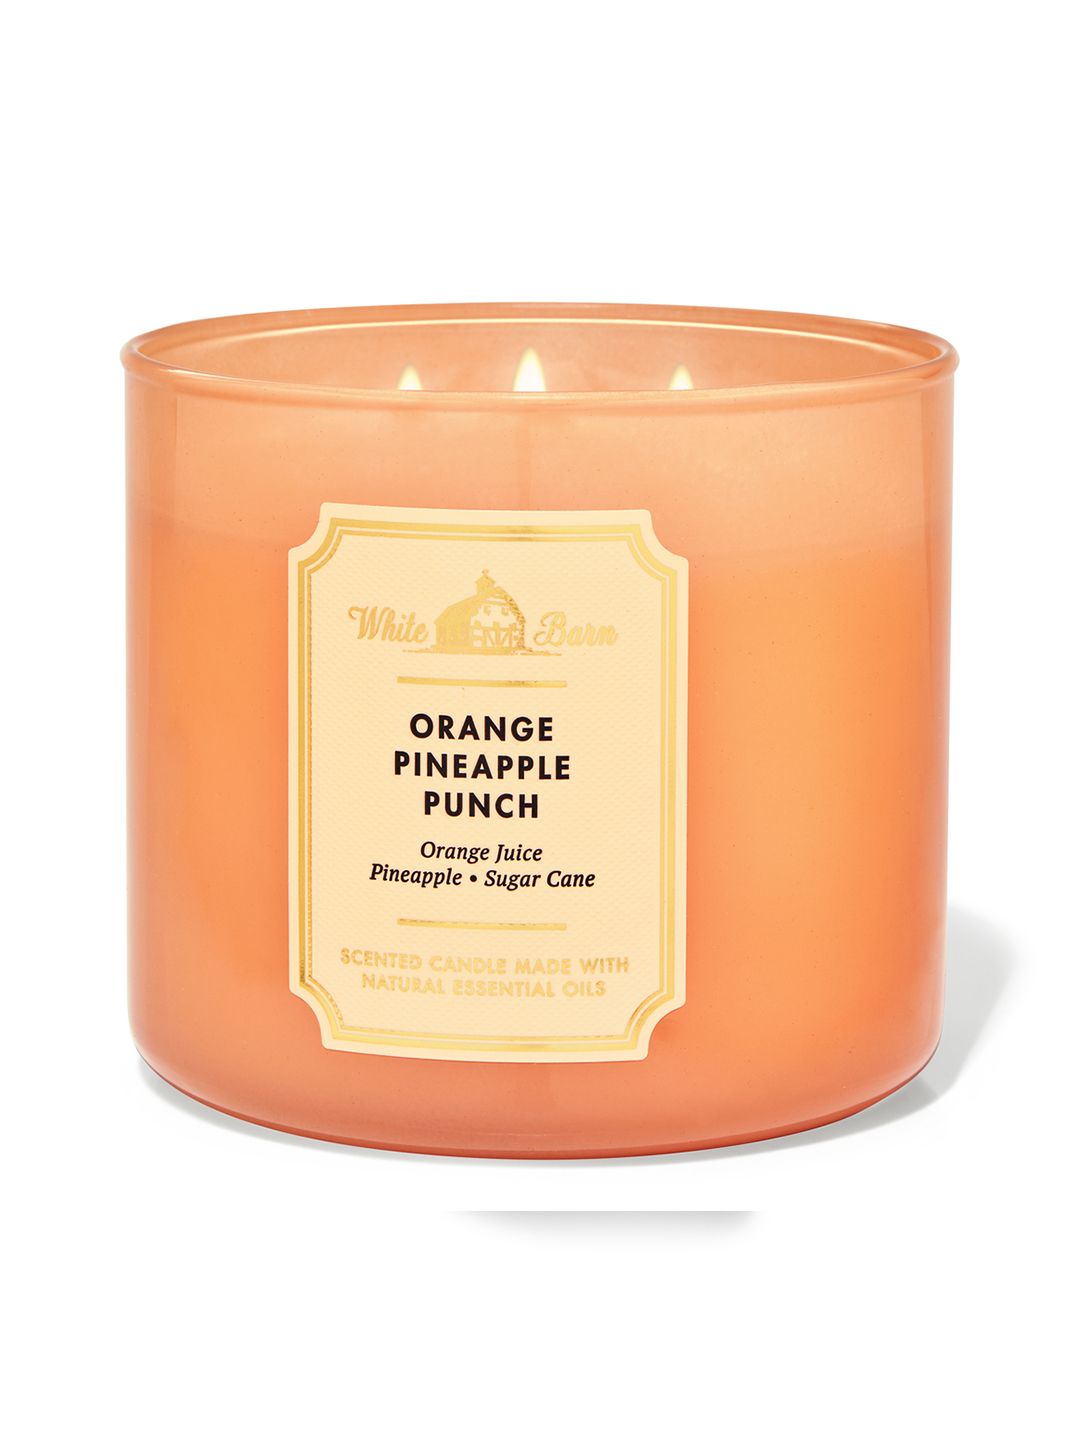 Bath & Body Works Orange Pineapple Punch 3-Wick Scented Candle - 411g Price in India